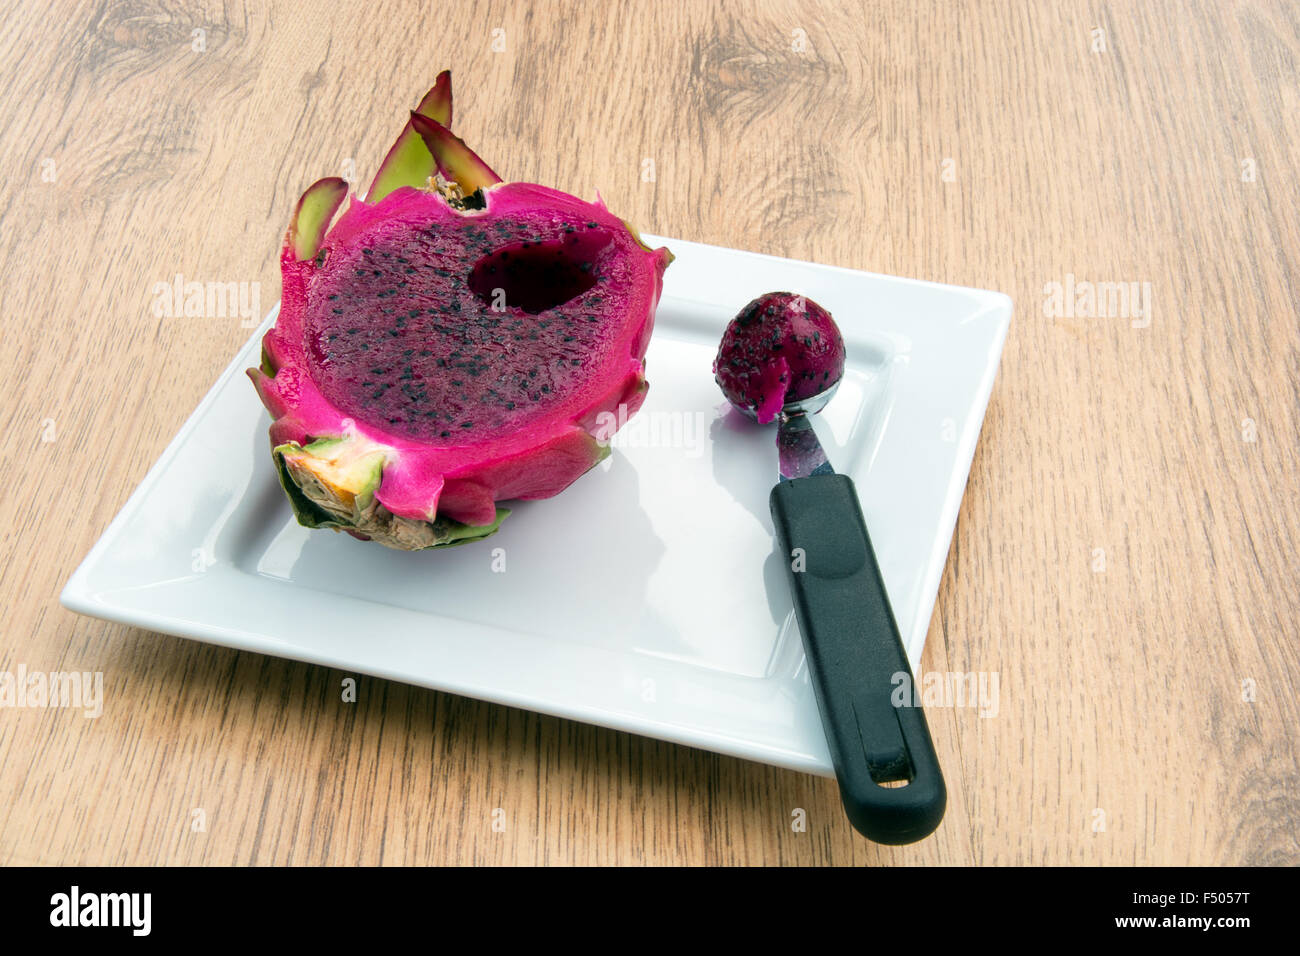 Dragon fruit cut open and piece scooped out Stock Photo